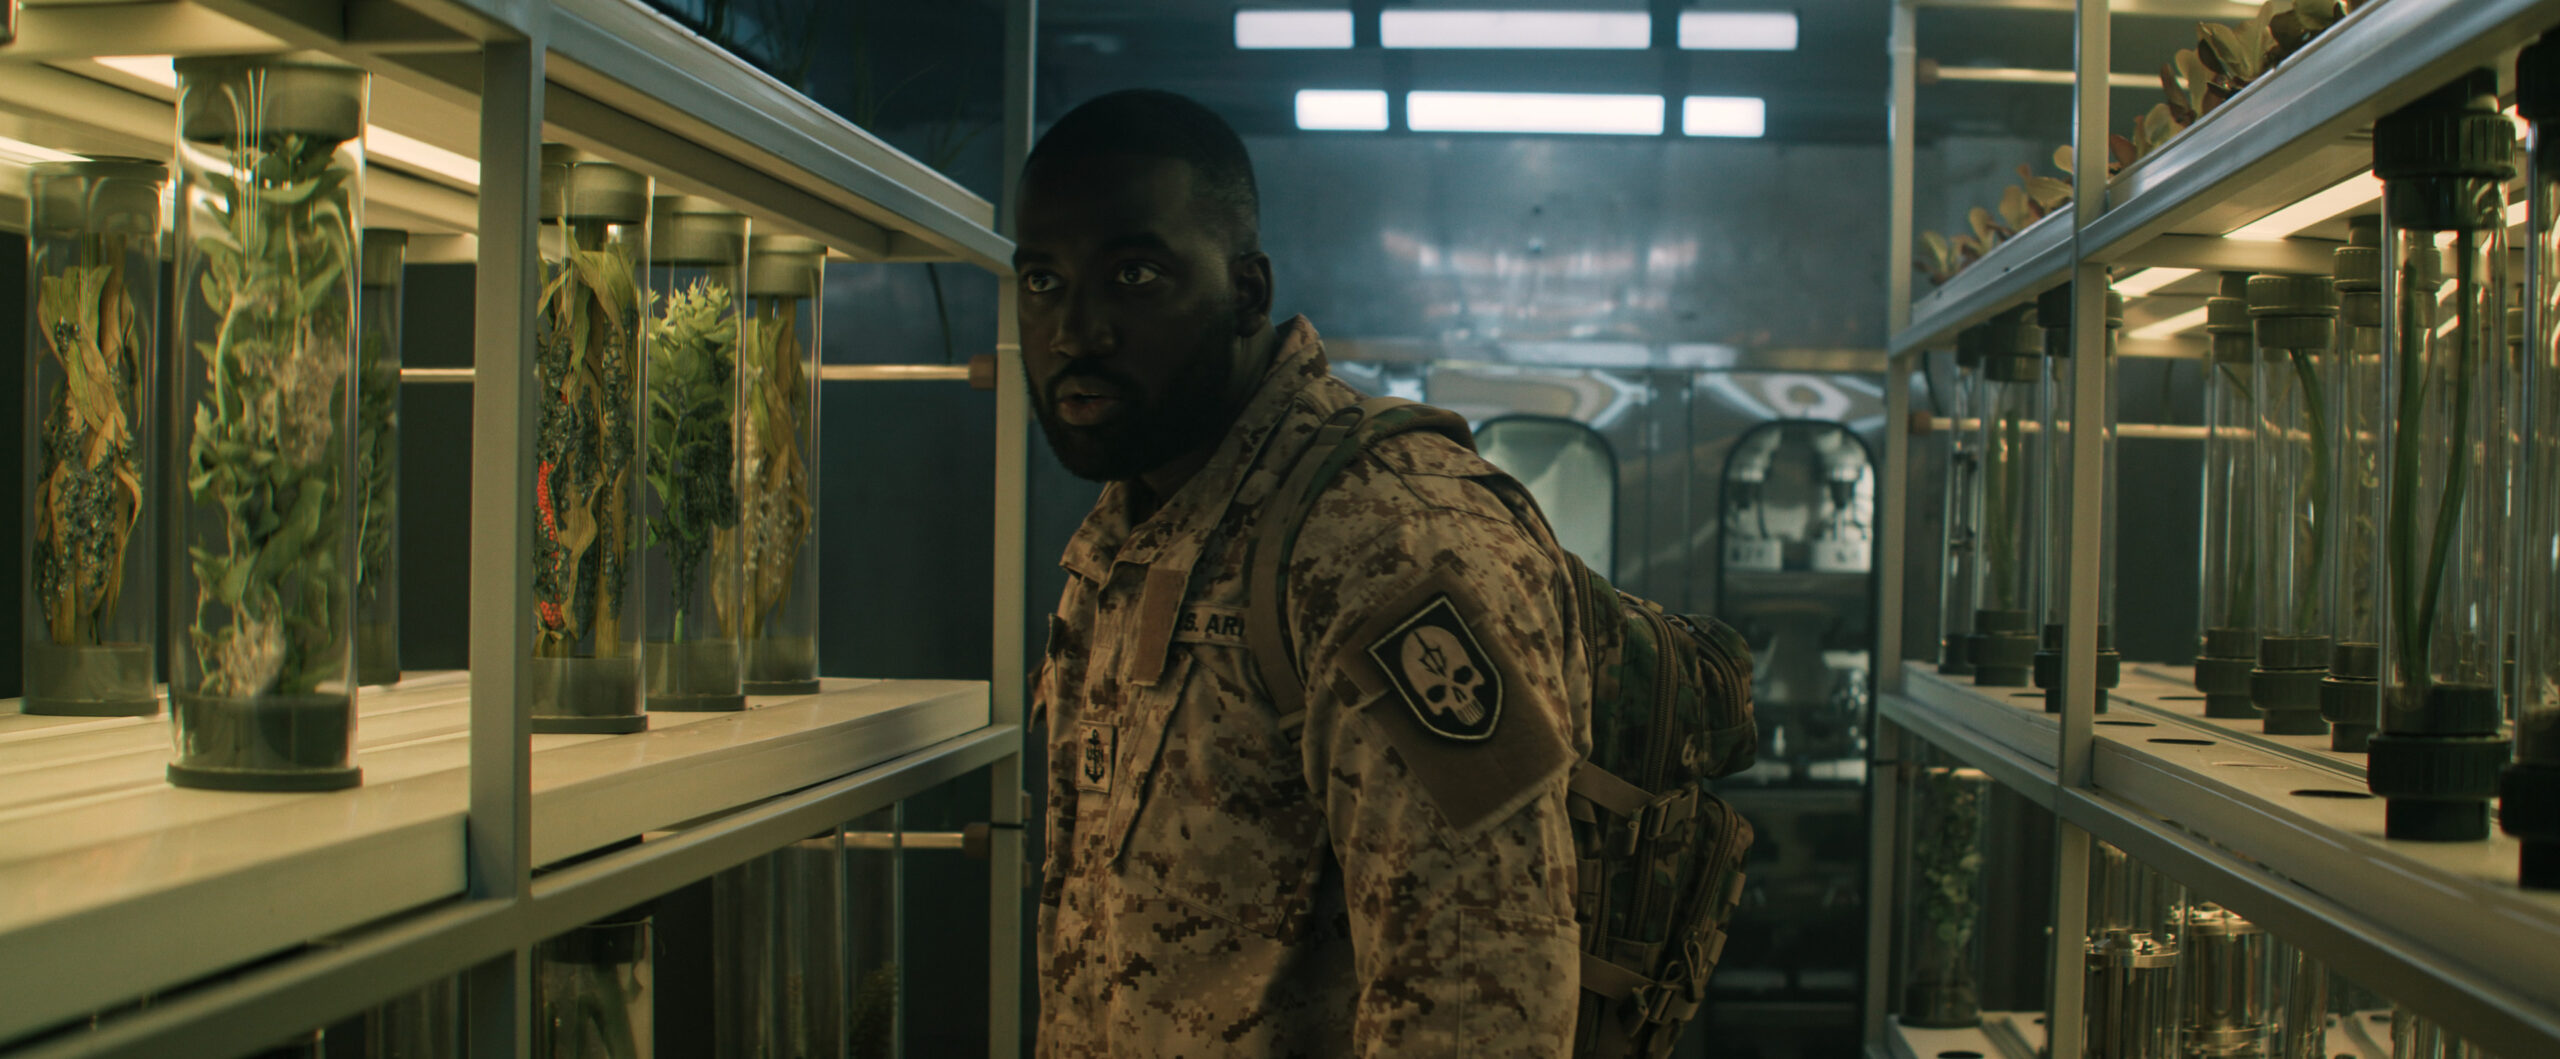 Apple TV’s Invasion Preview Clip Has Shamier Anderson Returning To Small Town Where the Invasion Started